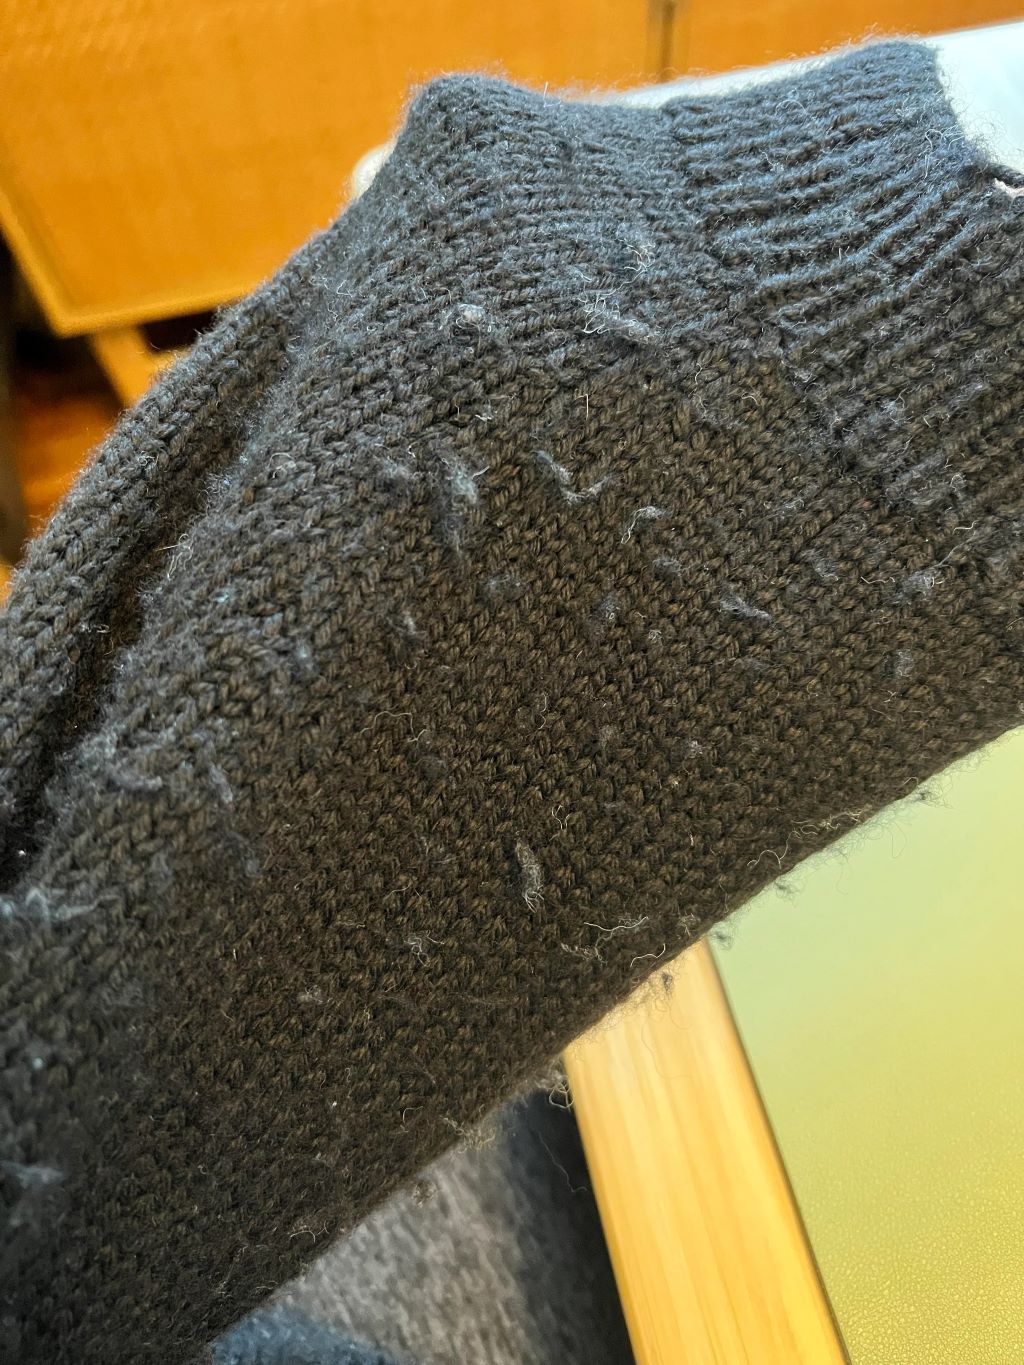 Why do my sweaters get fuzz balls?